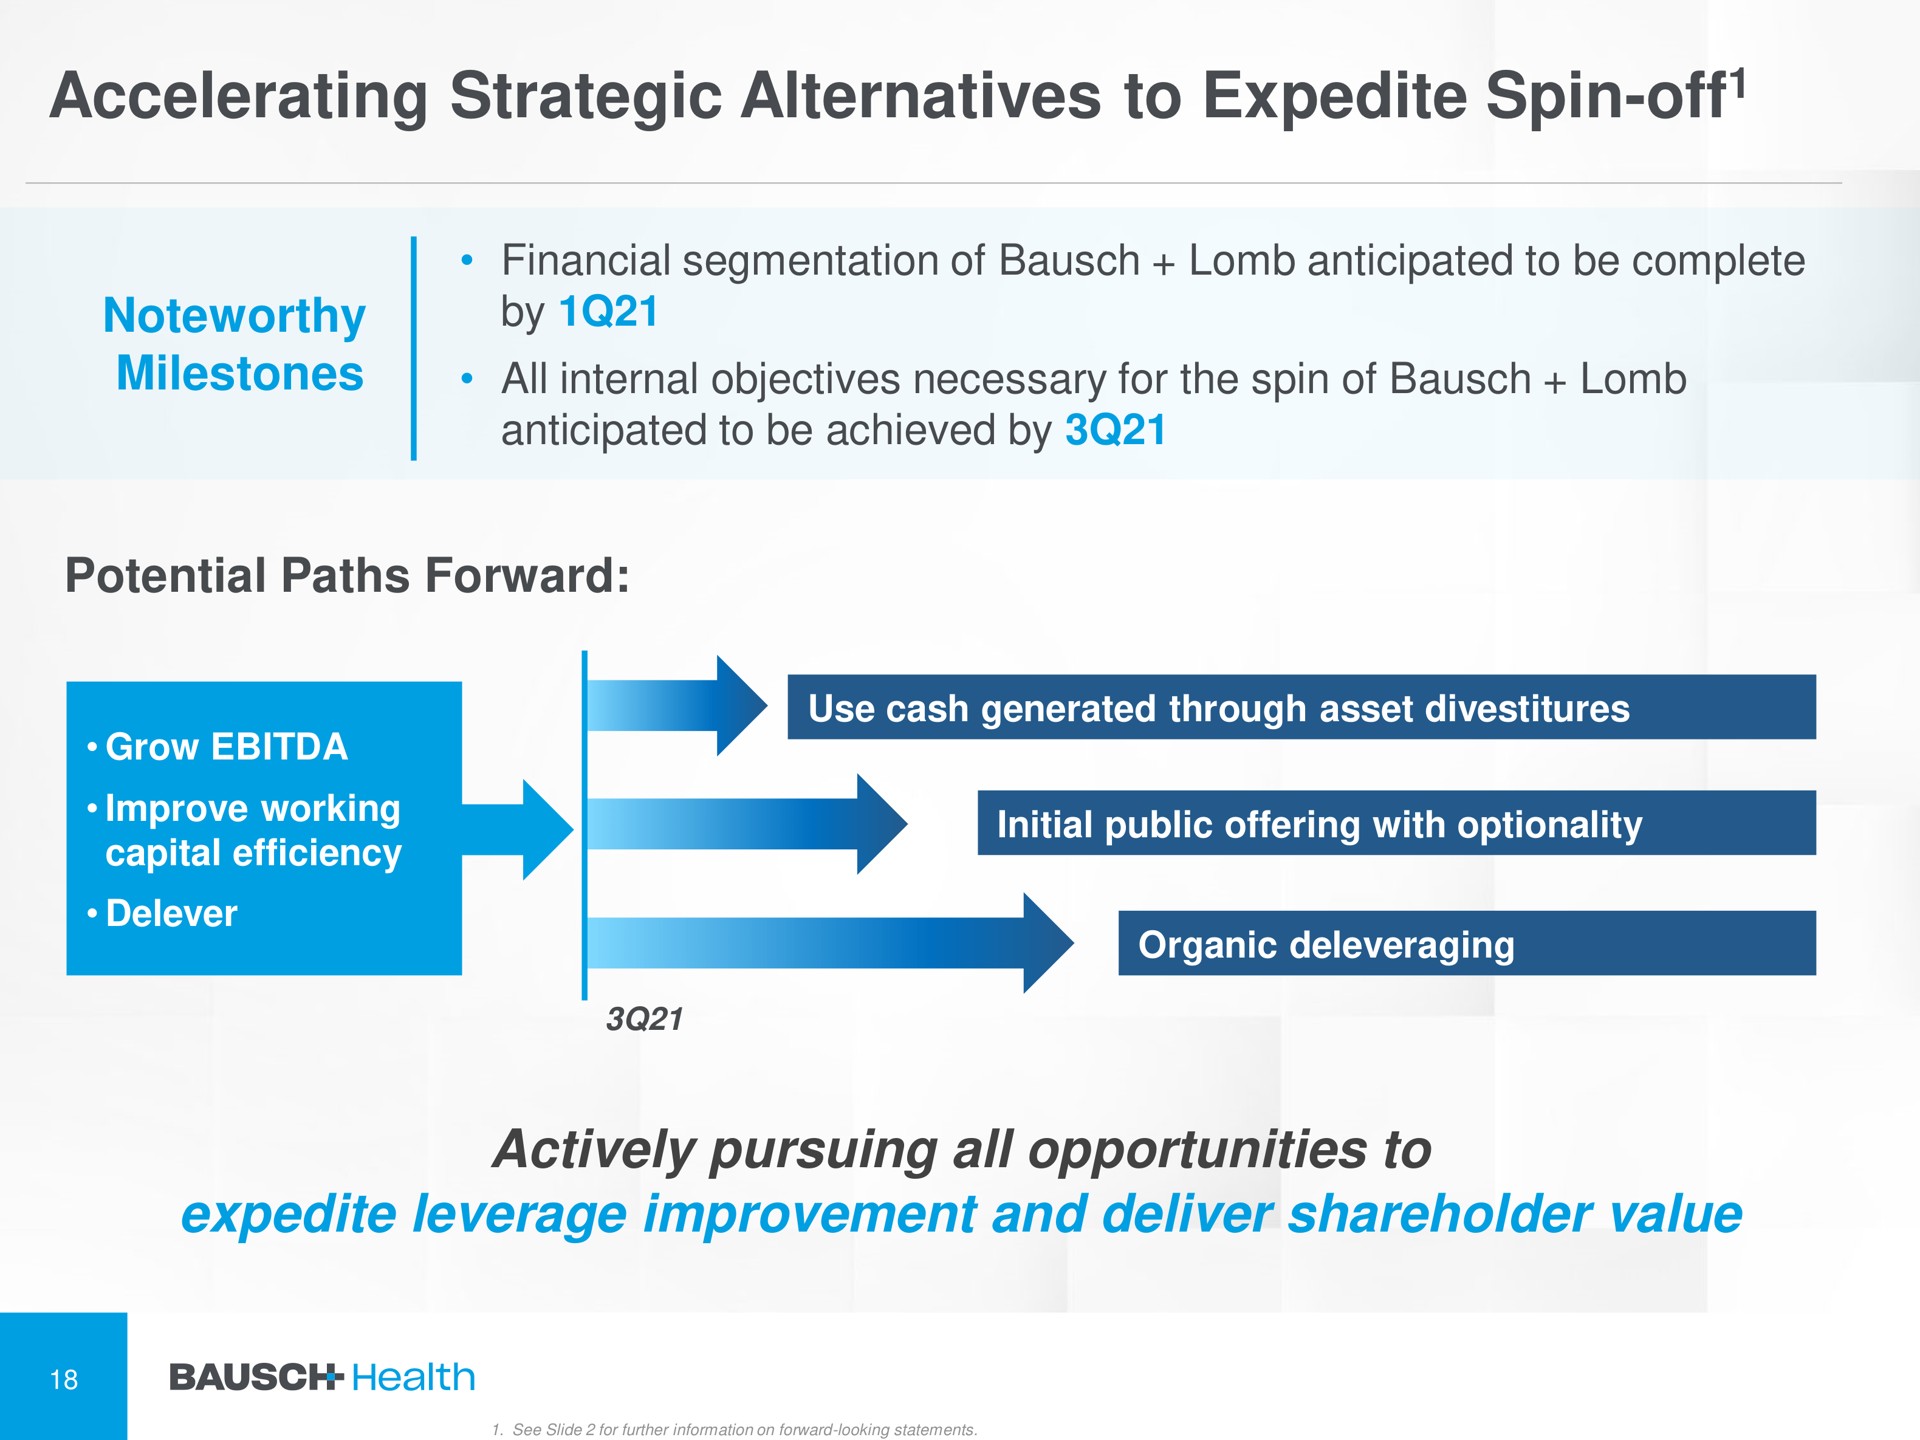 accelerating strategic alternatives to expedite spin off noteworthy milestones potential paths forward actively pursuing all opportunities to expedite leverage improvement and deliver shareholder value spin off by objectives necessary for the spin of poe | Bausch Health Companies